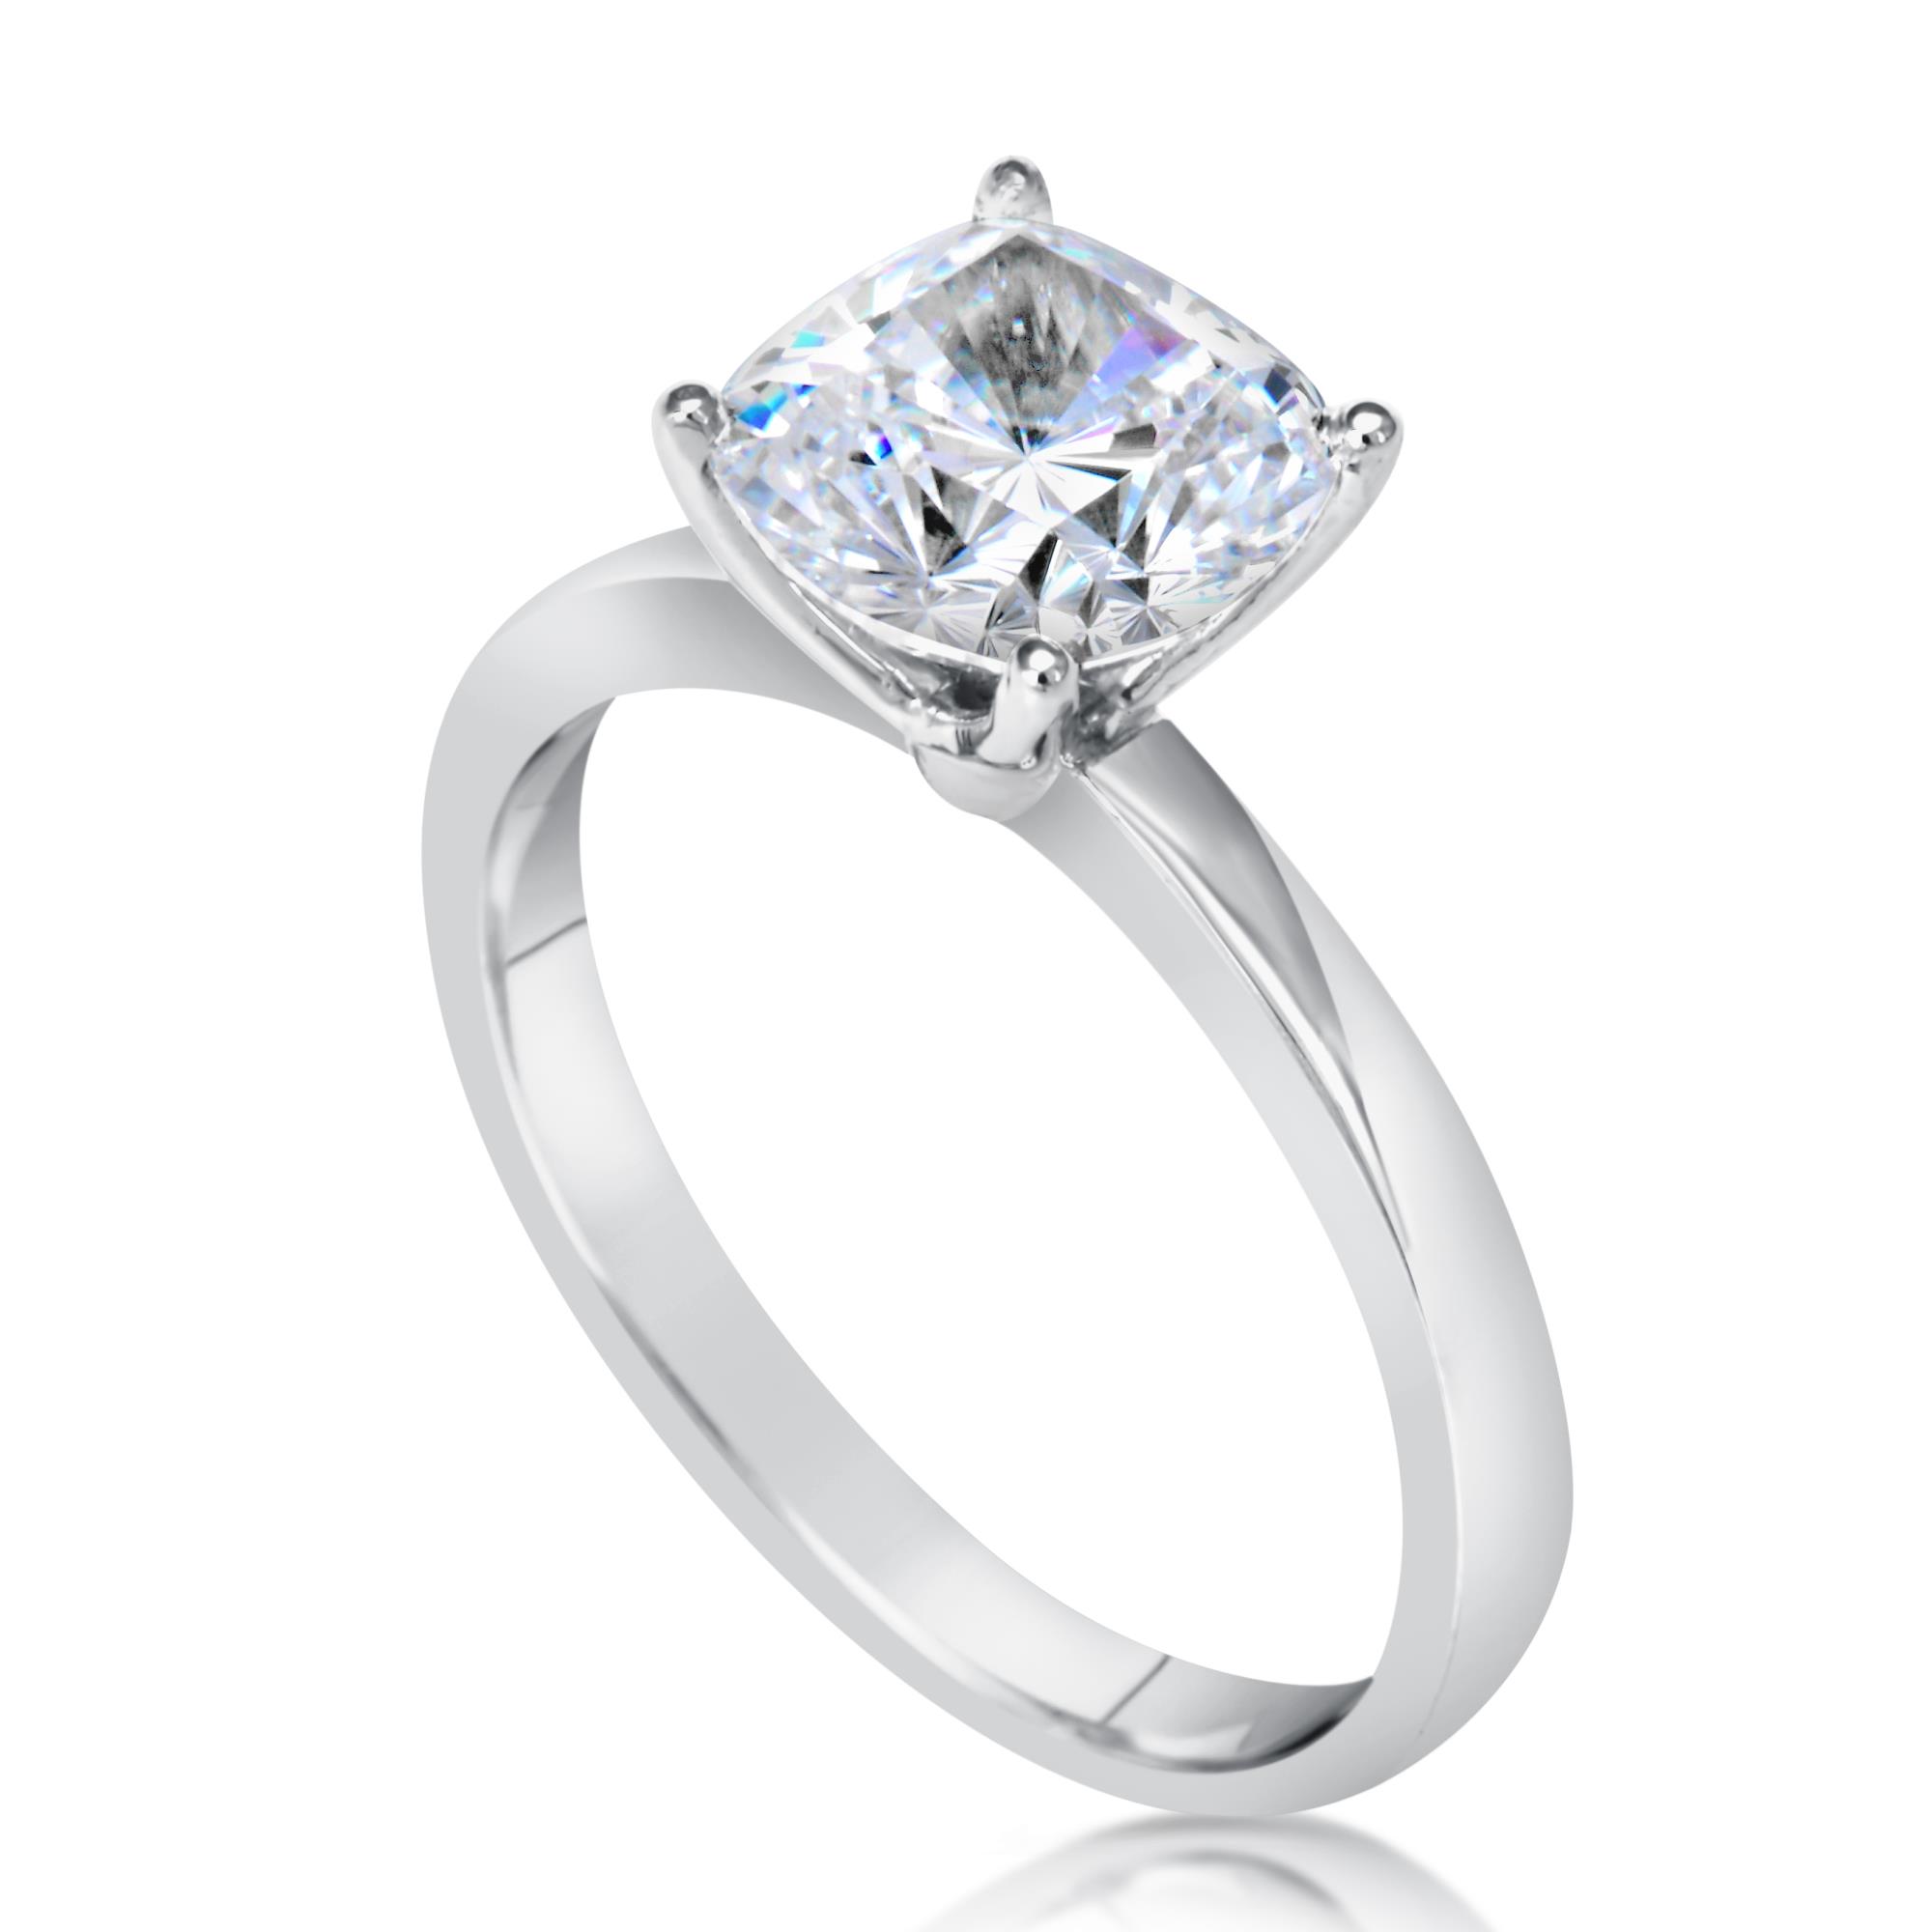 125 Ct 4 Prong Solitaire Cushion Cut Diamond Engagement Ring Si2 G